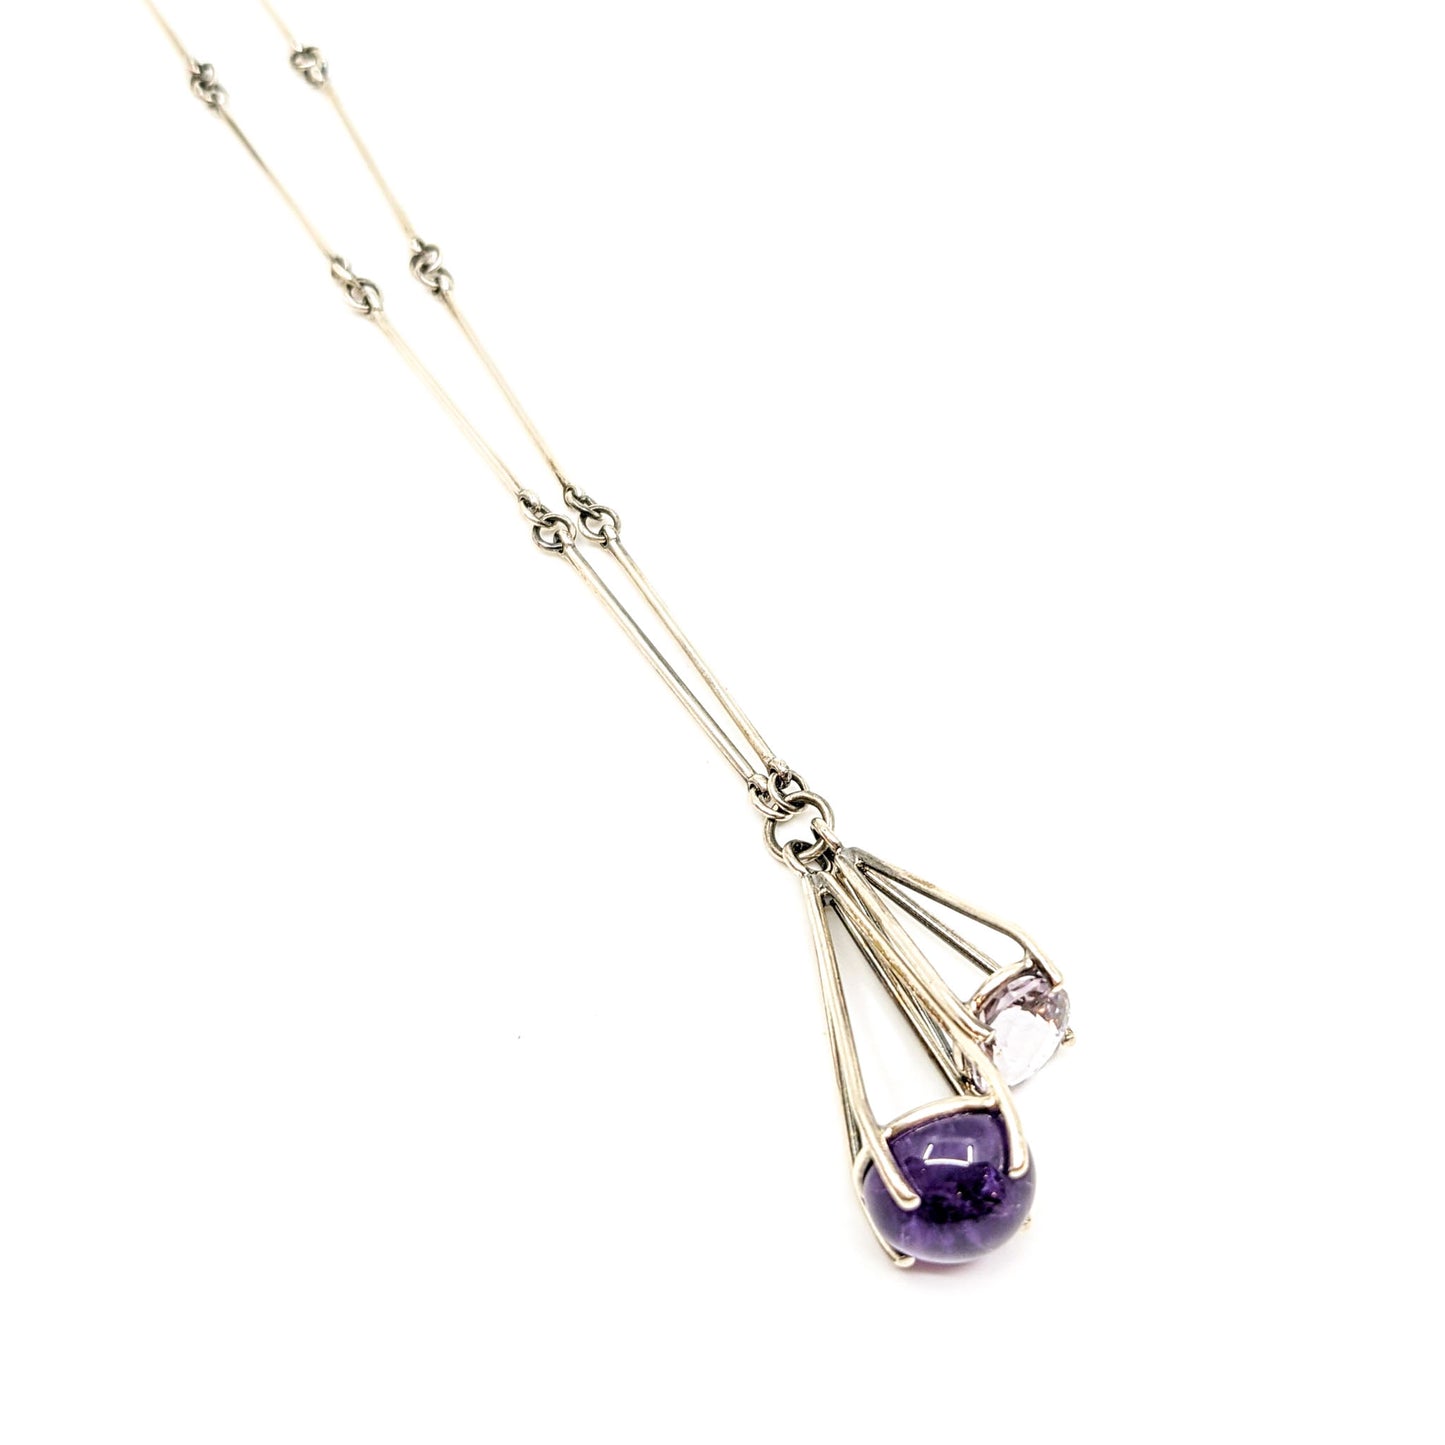 Large 2-Stone Prong Pendant with Amethyst